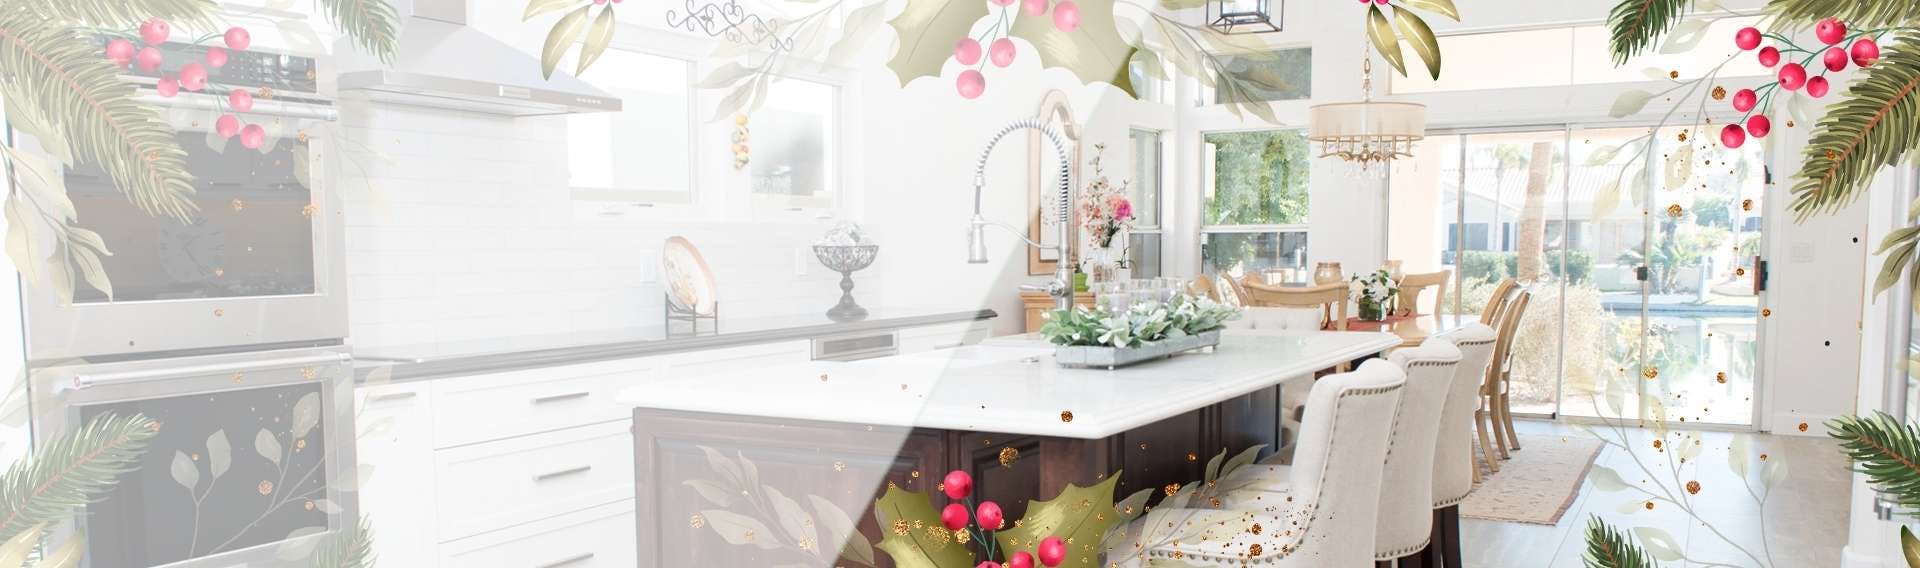 Classy Kitchen Banner with holiday plants around